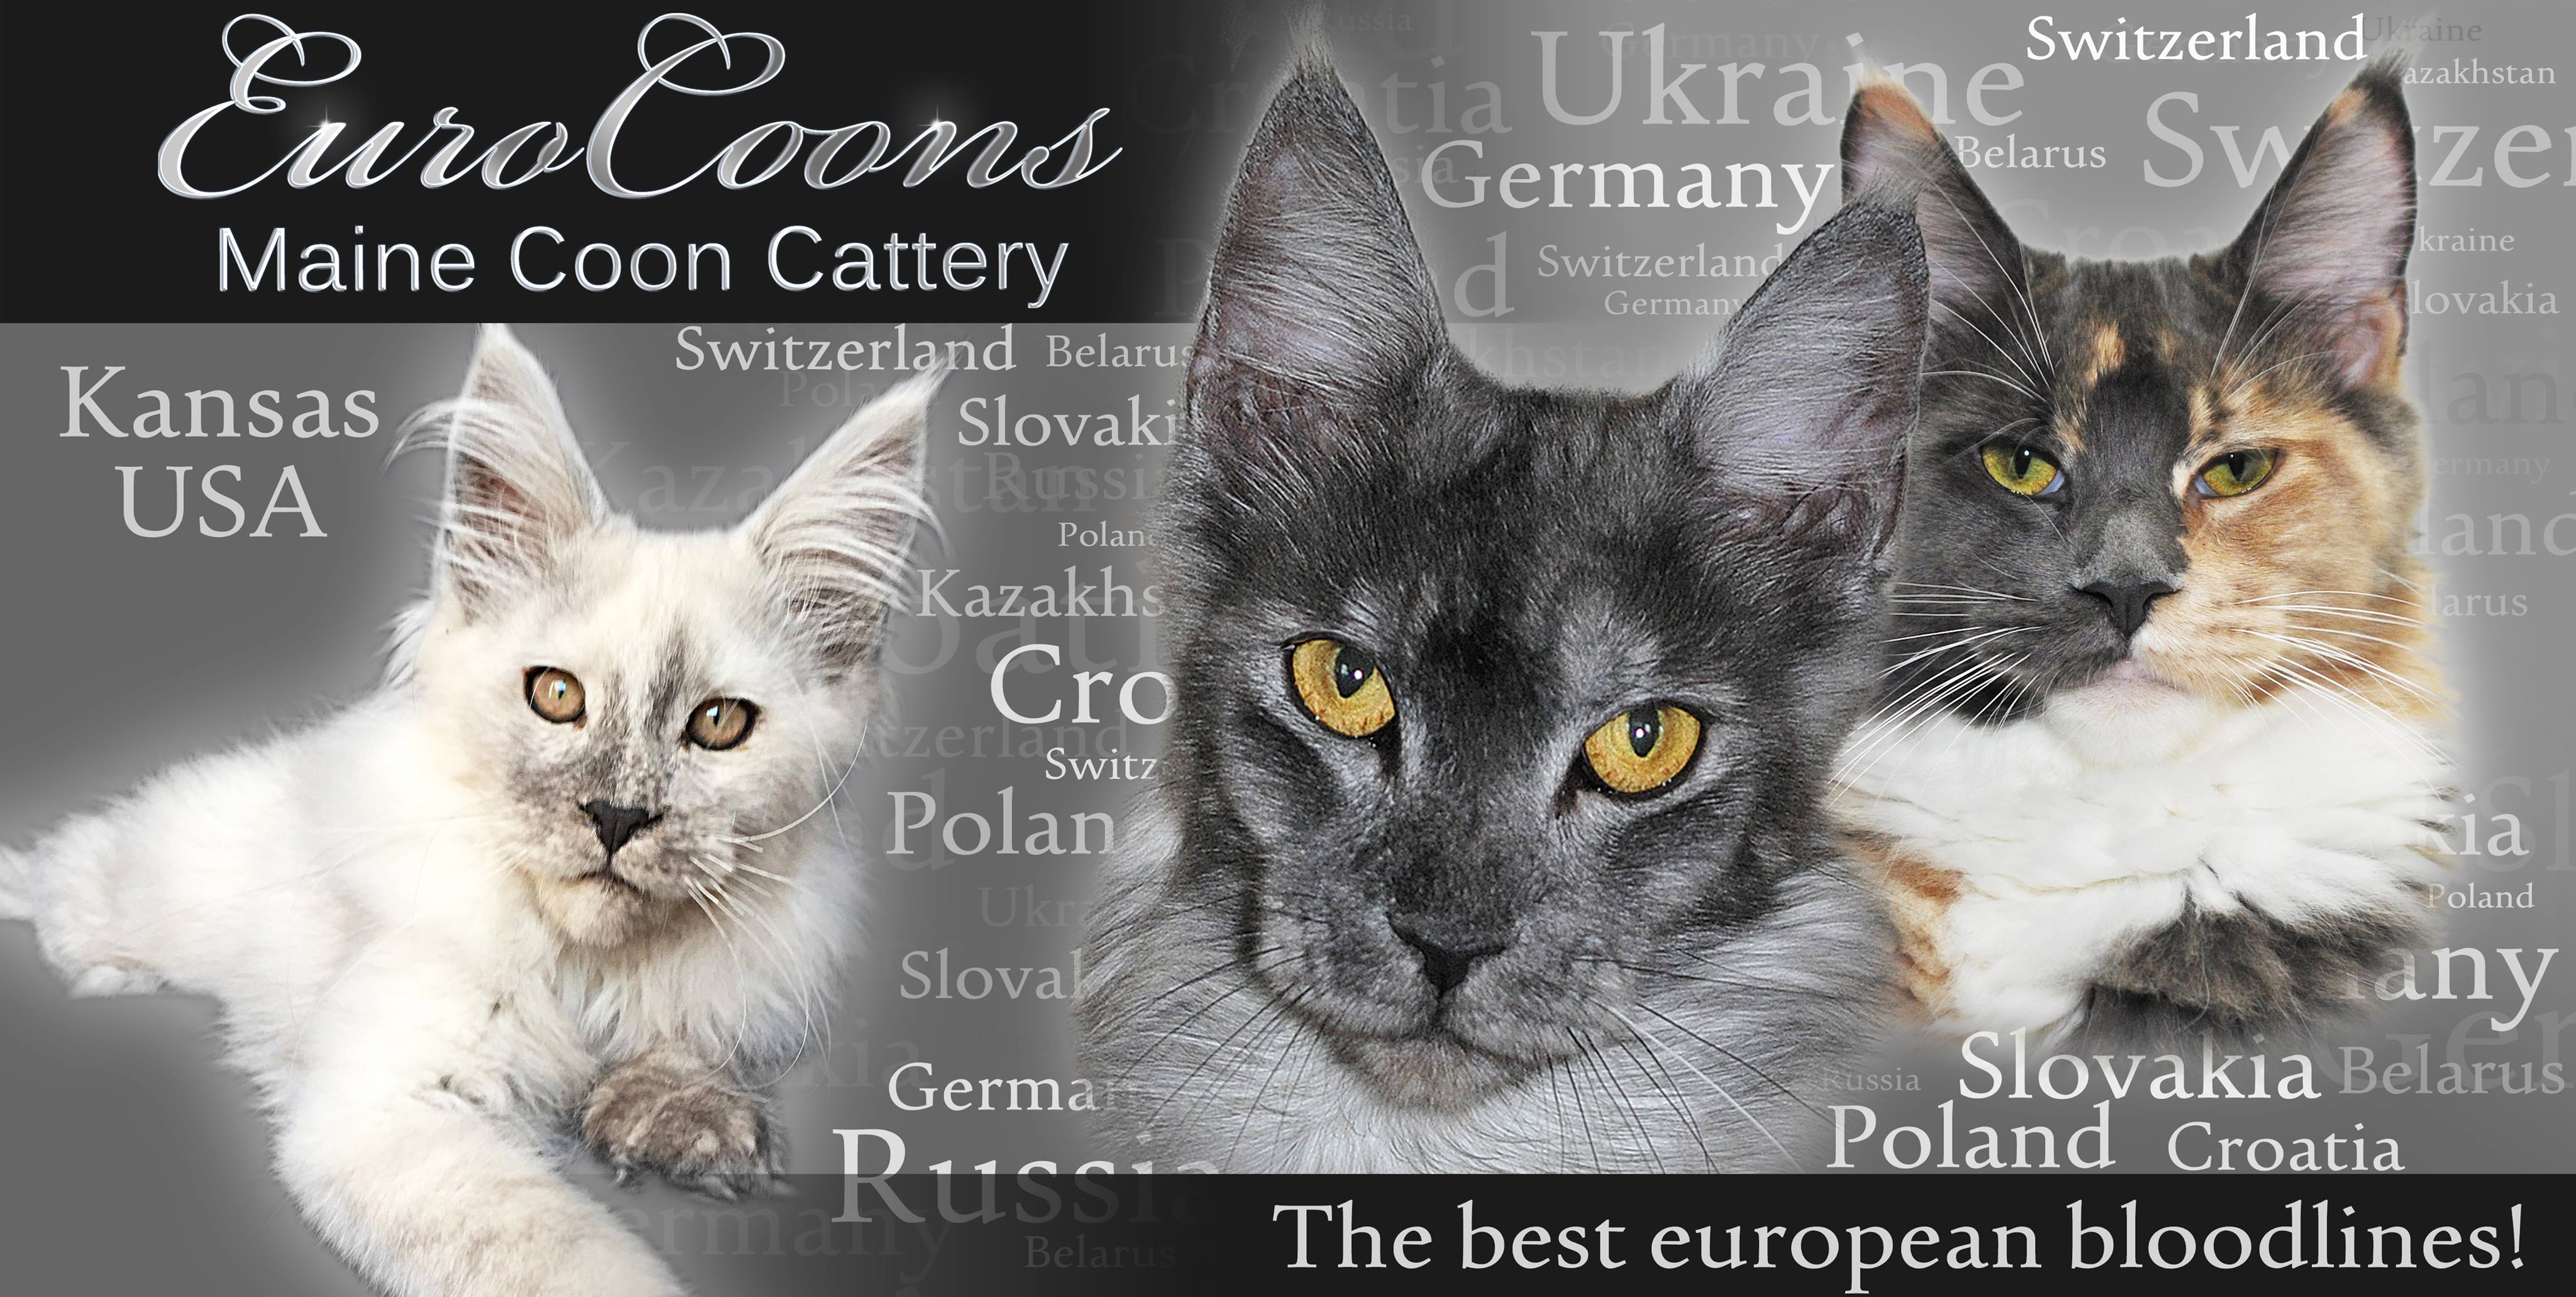 EuroCoons Maine Coon Cattery